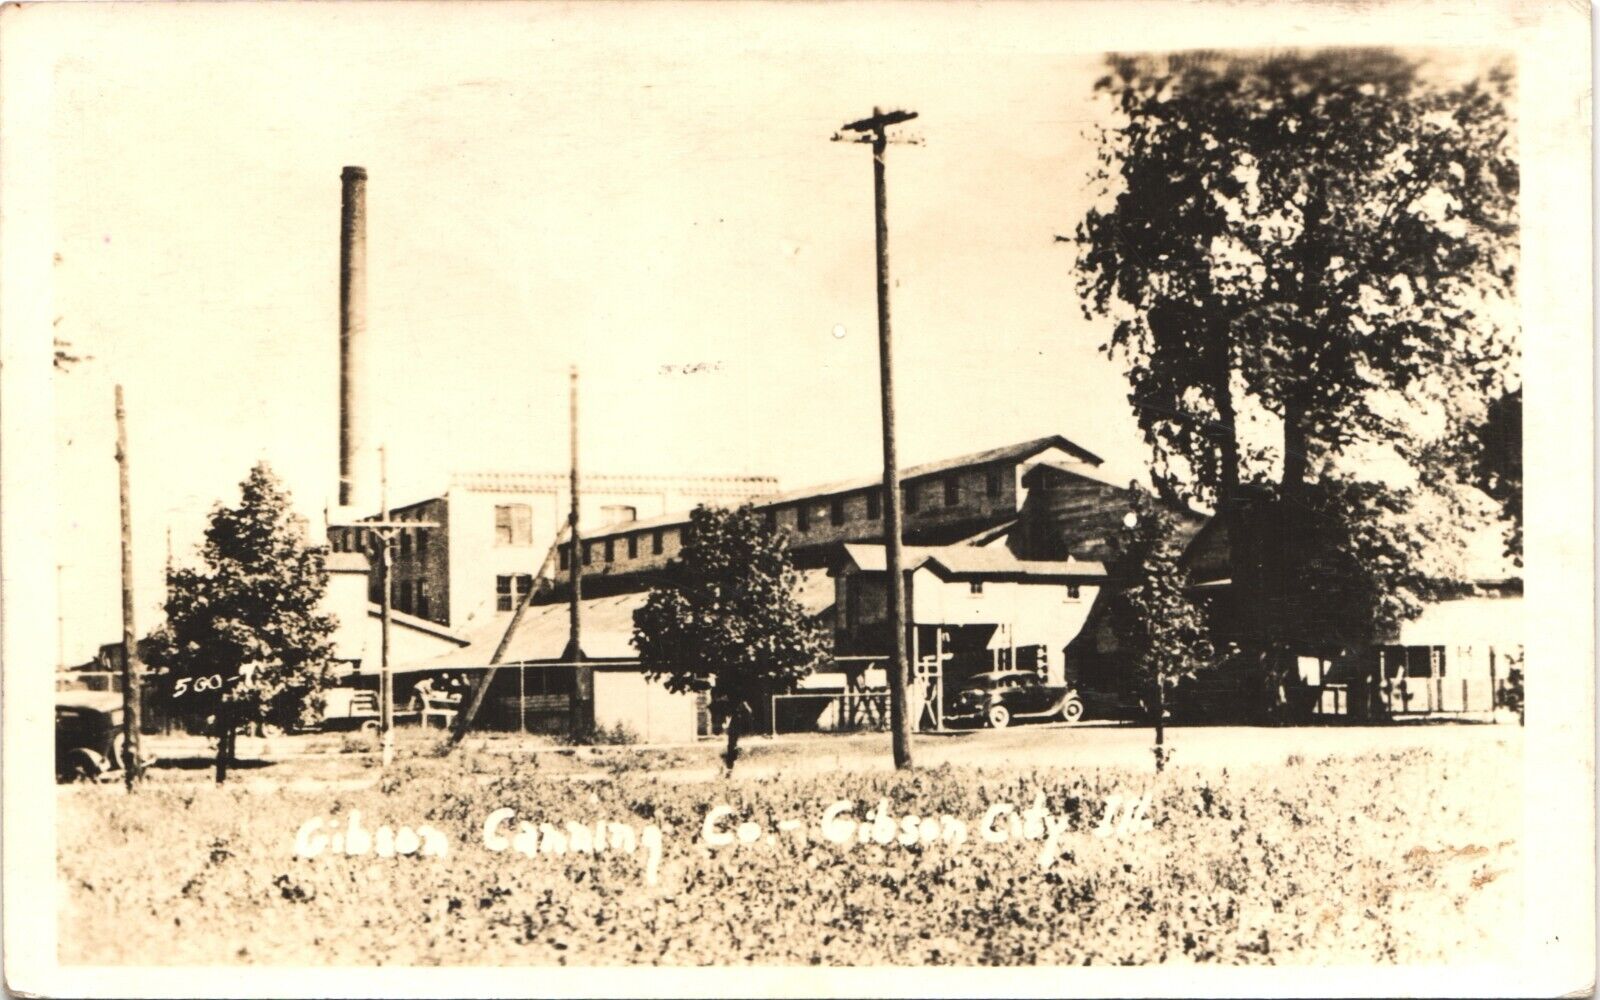 GIBSON CITY, IL, CANNING FACTORY real photo postcard ILLINOIS 1920s antique rppc